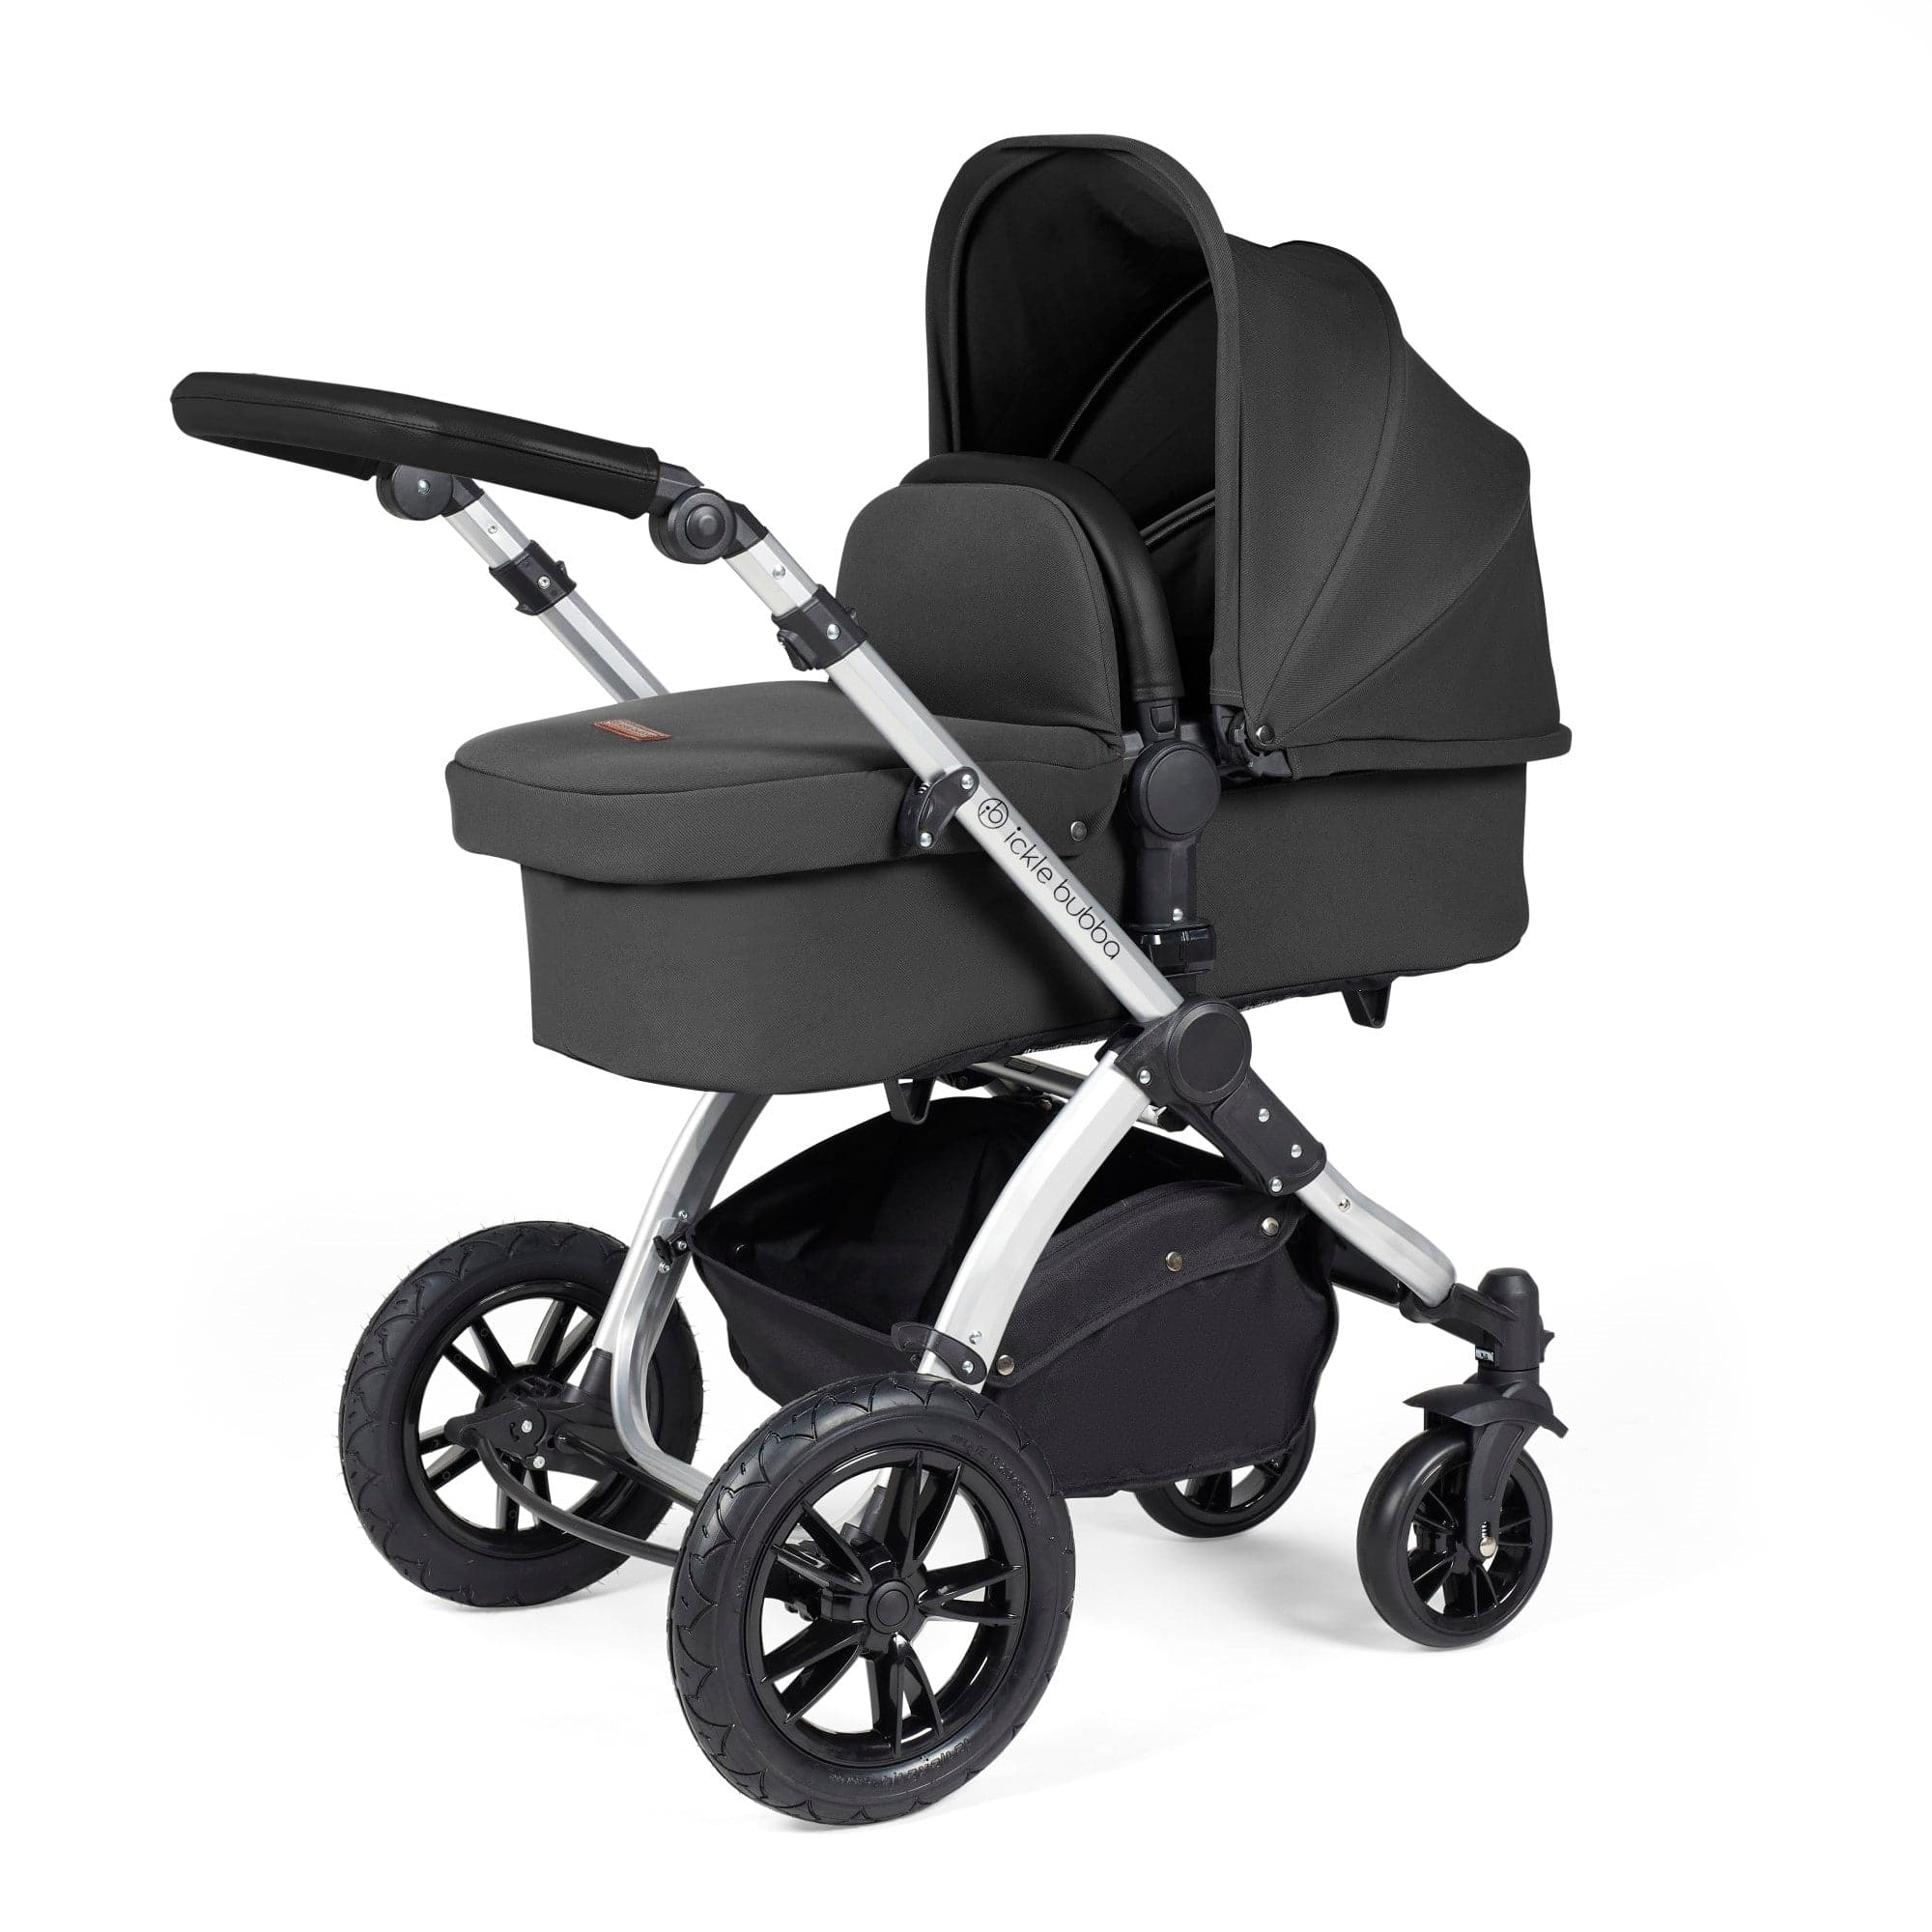 Ickle Bubba Stomp Luxe All-In-One I-Size Travel System With Isofix Base - Silver / Charcoal Grey / Black -  | For Your Little One